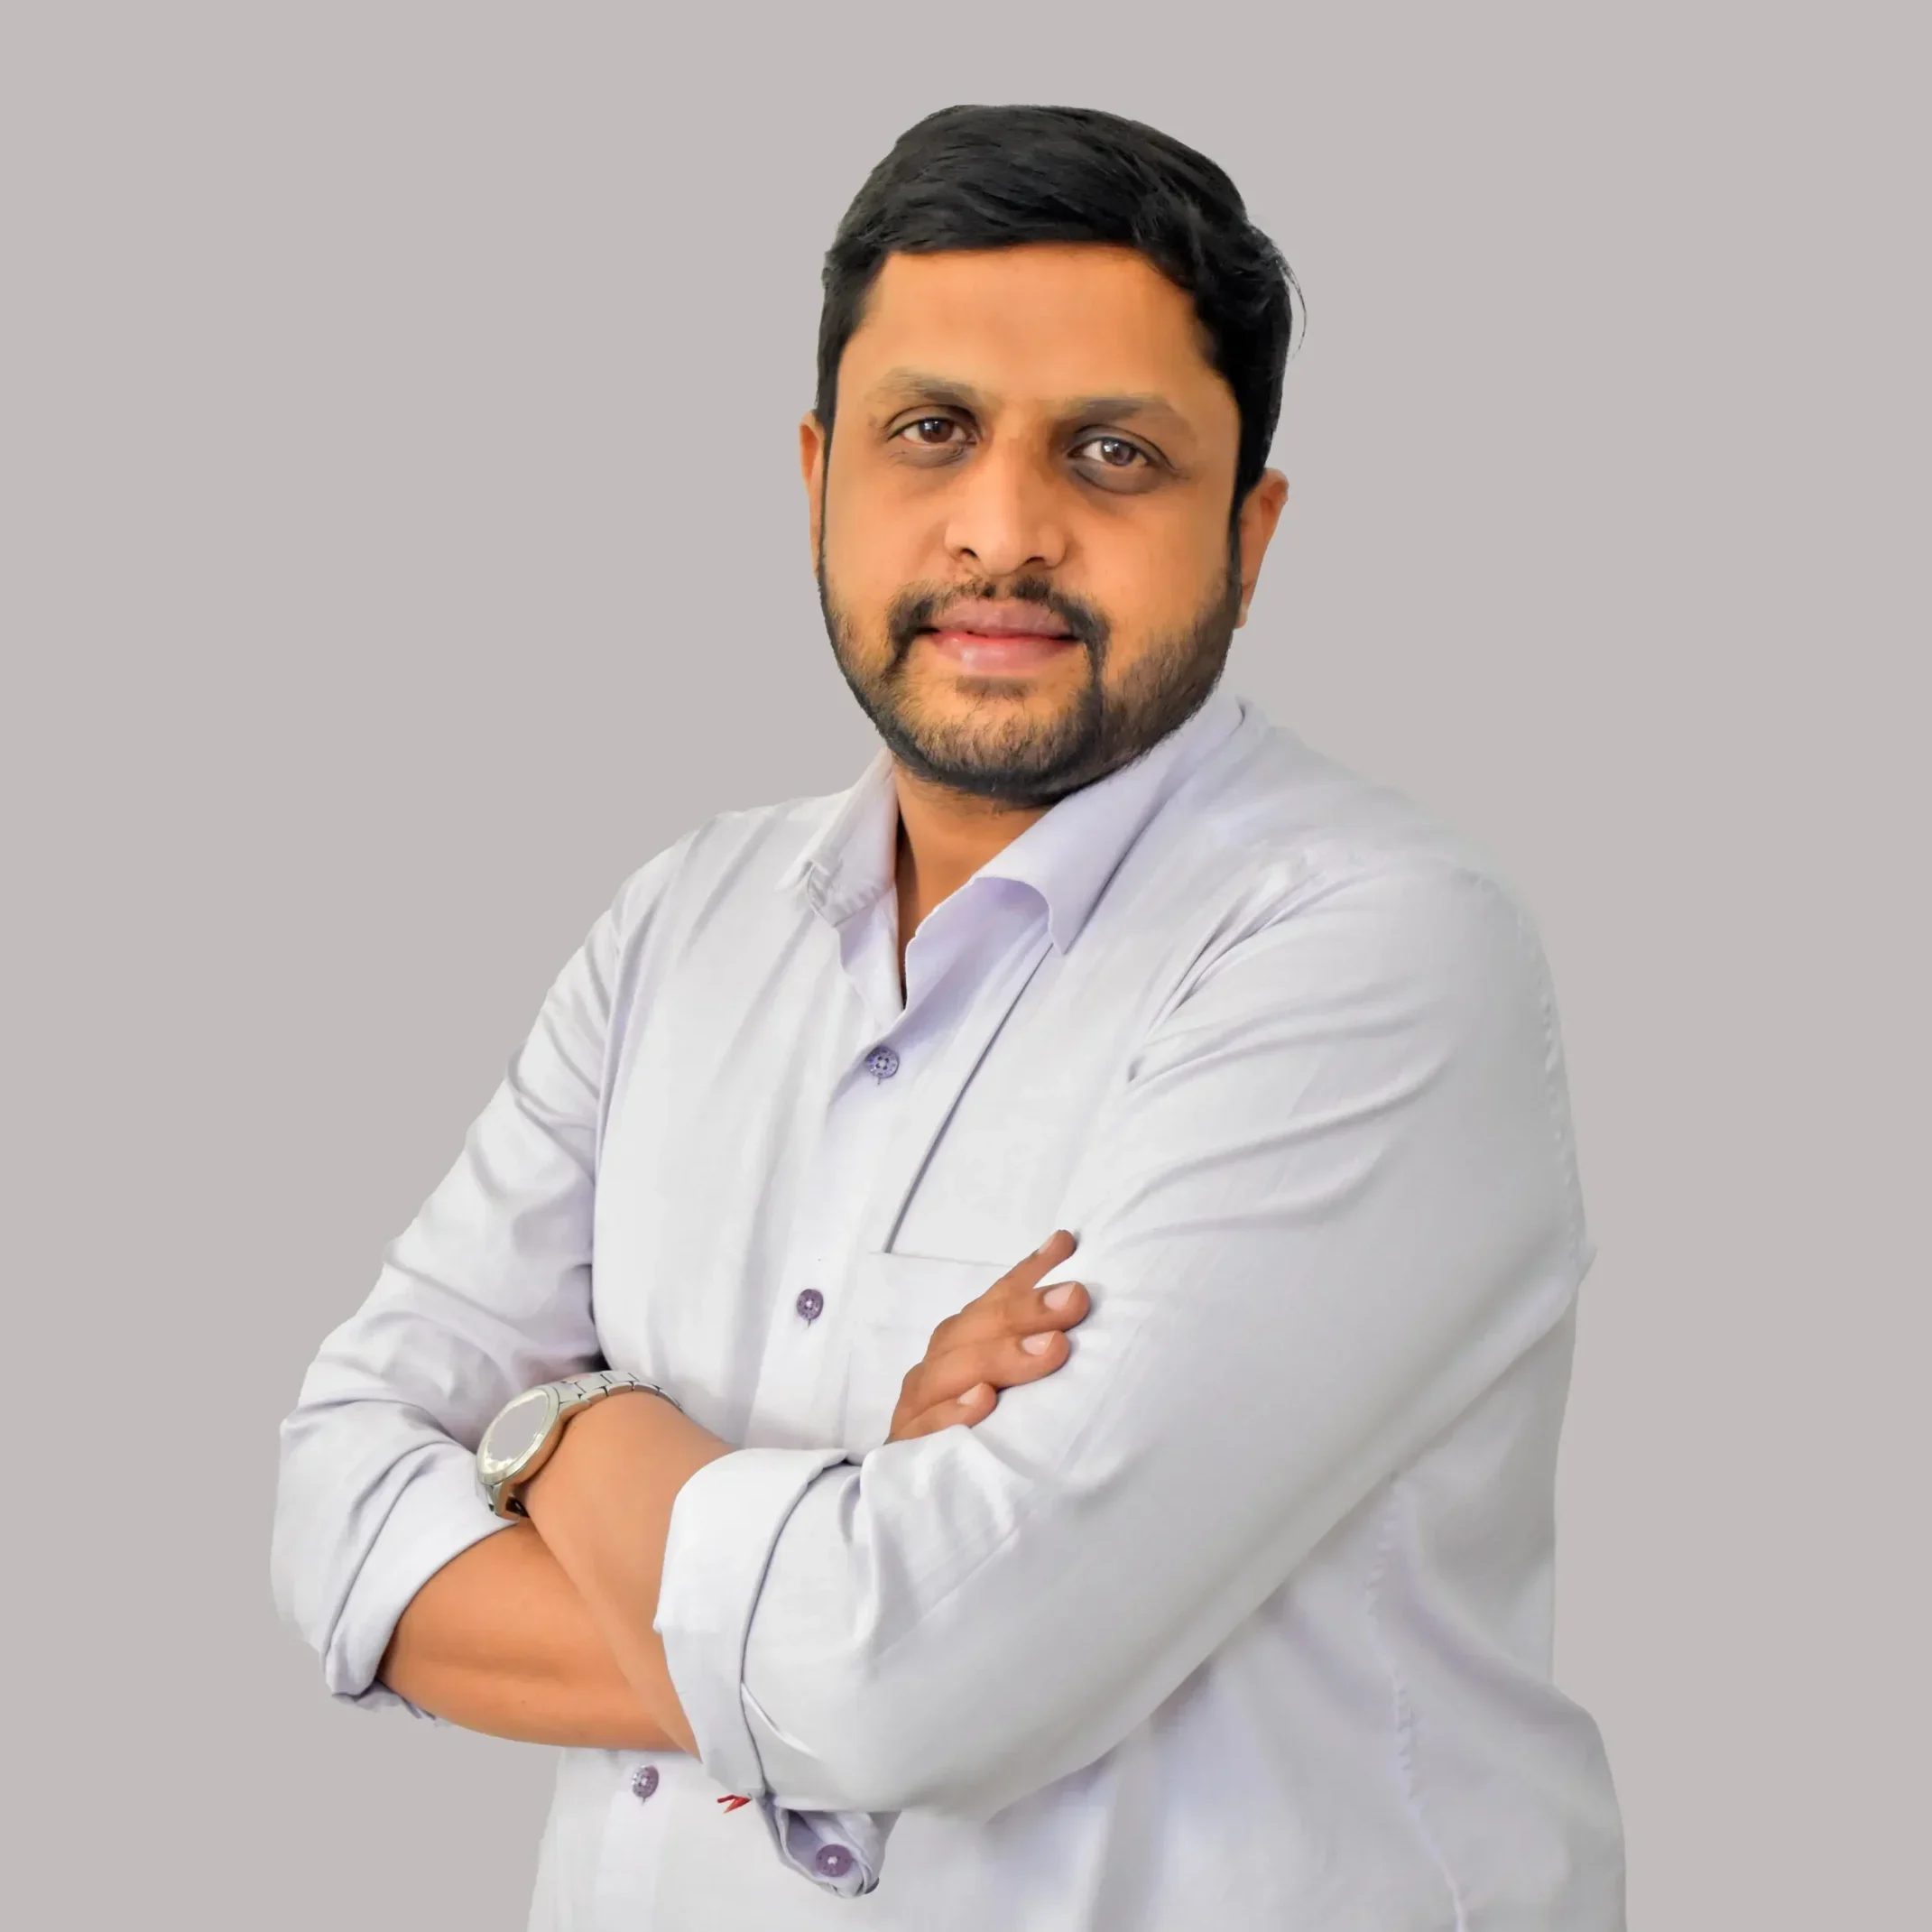 Image of Dr Nithin, top cardiologist in altius hospital, bengaluru